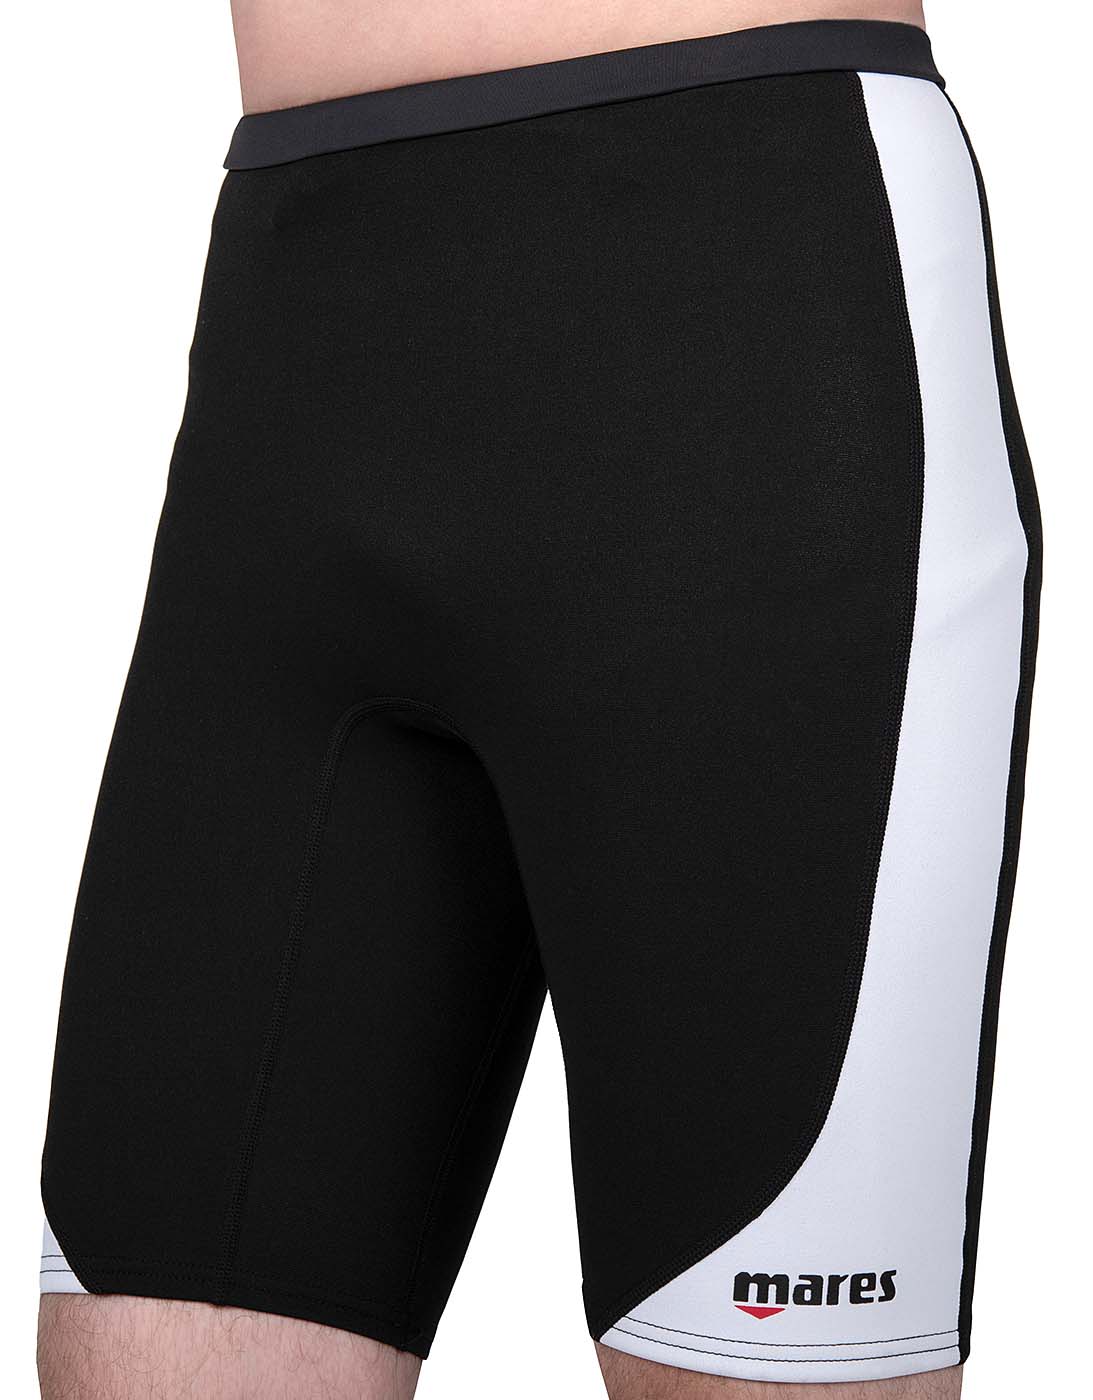 Thermo Guard Shorts 0,5mm - MARES